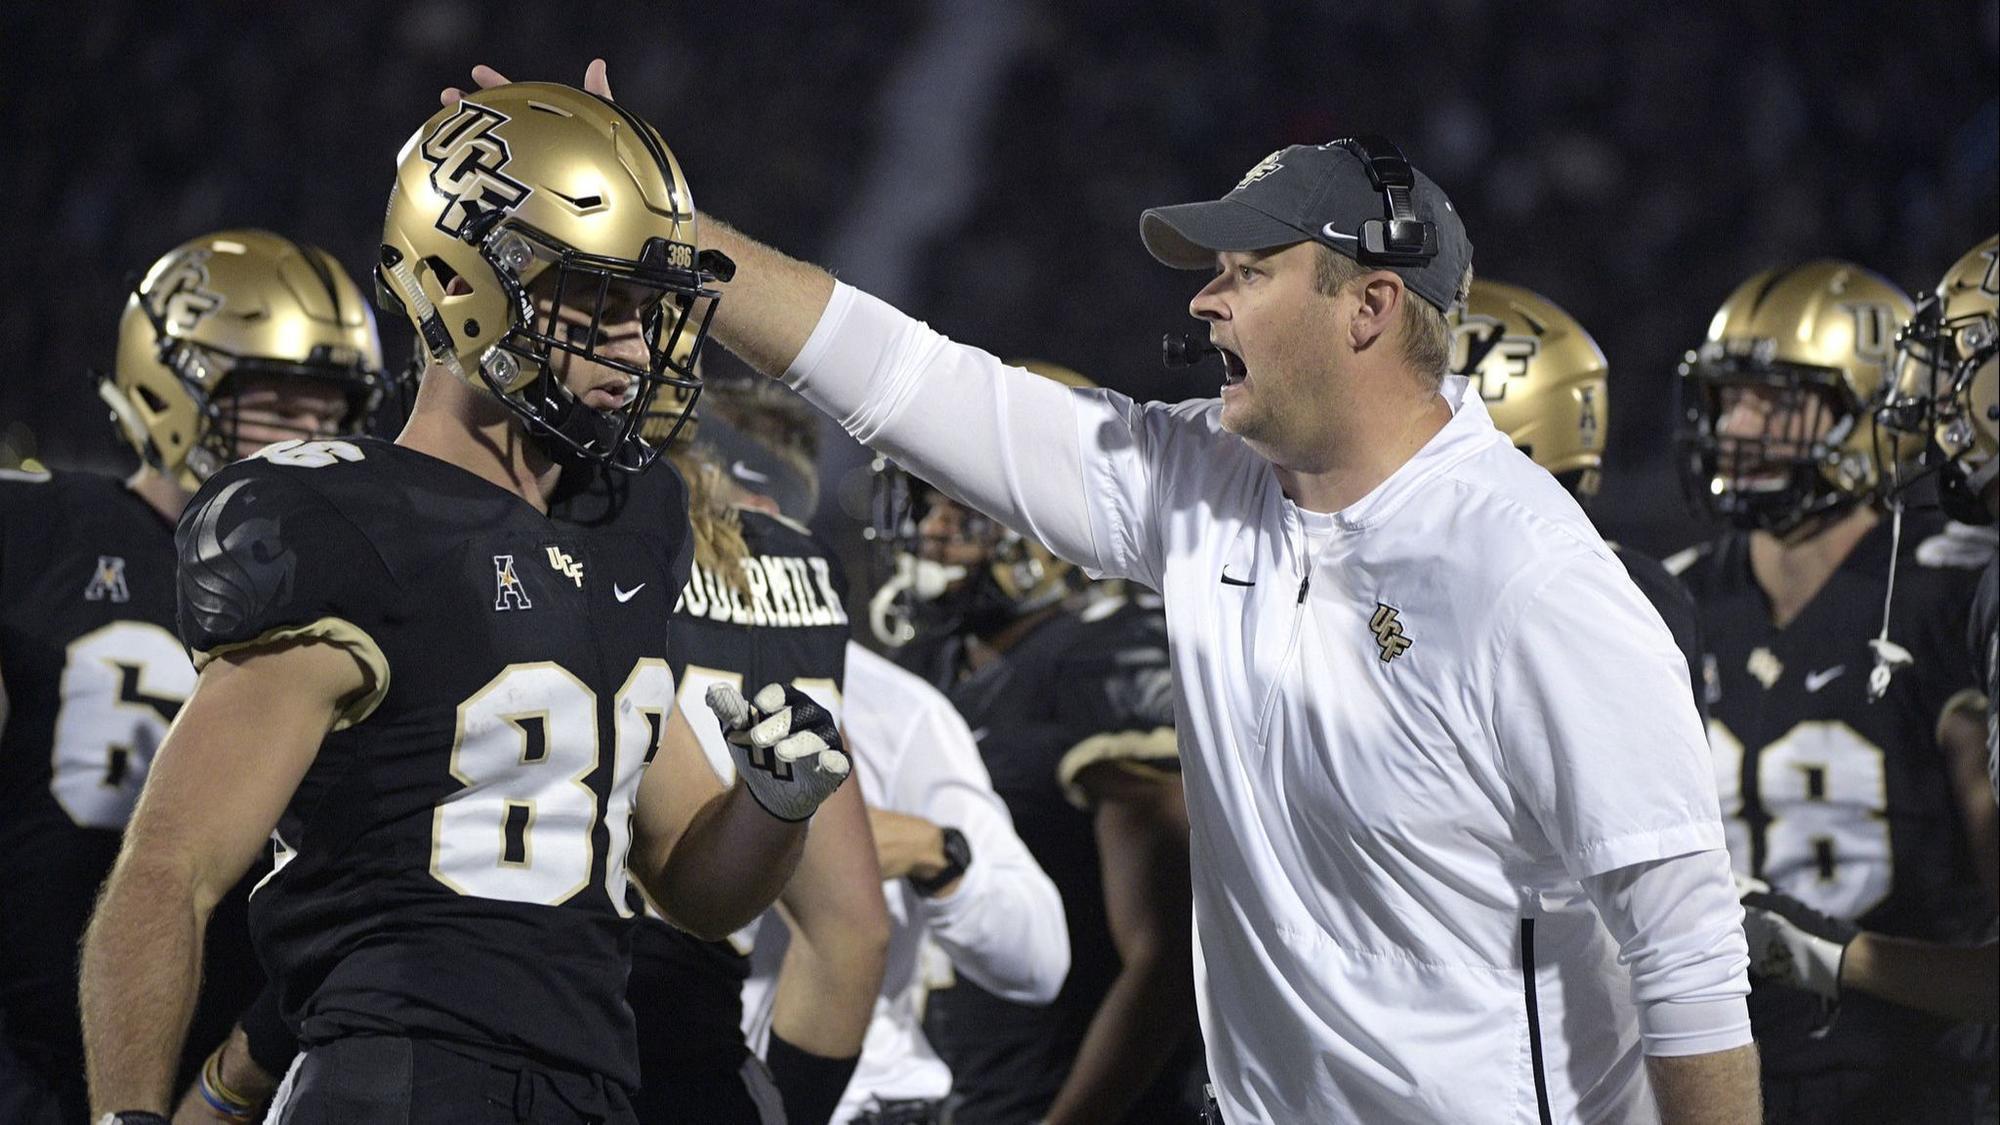 UCF Bowl Forecast Where will the UCF Knights go bowling? Orlando